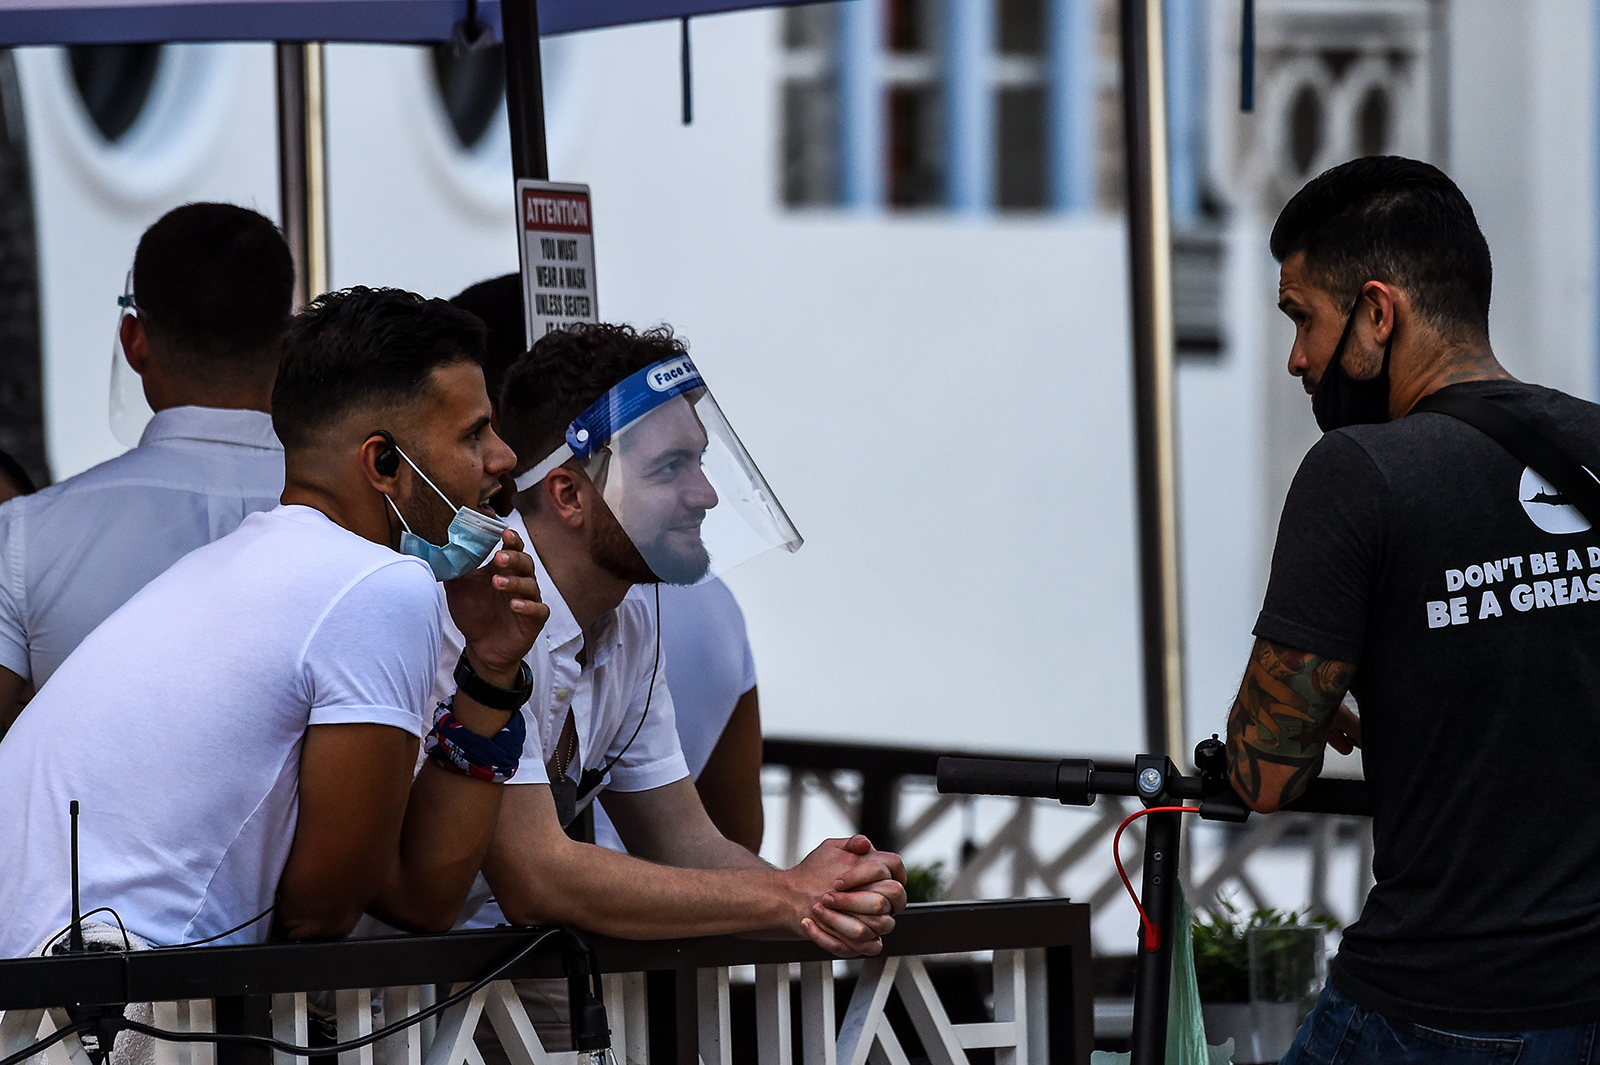 A waiter covers his face with a shield as he chats with another man at a restaurant on Ocean Drive in Miami Beach, Florida on July 14.